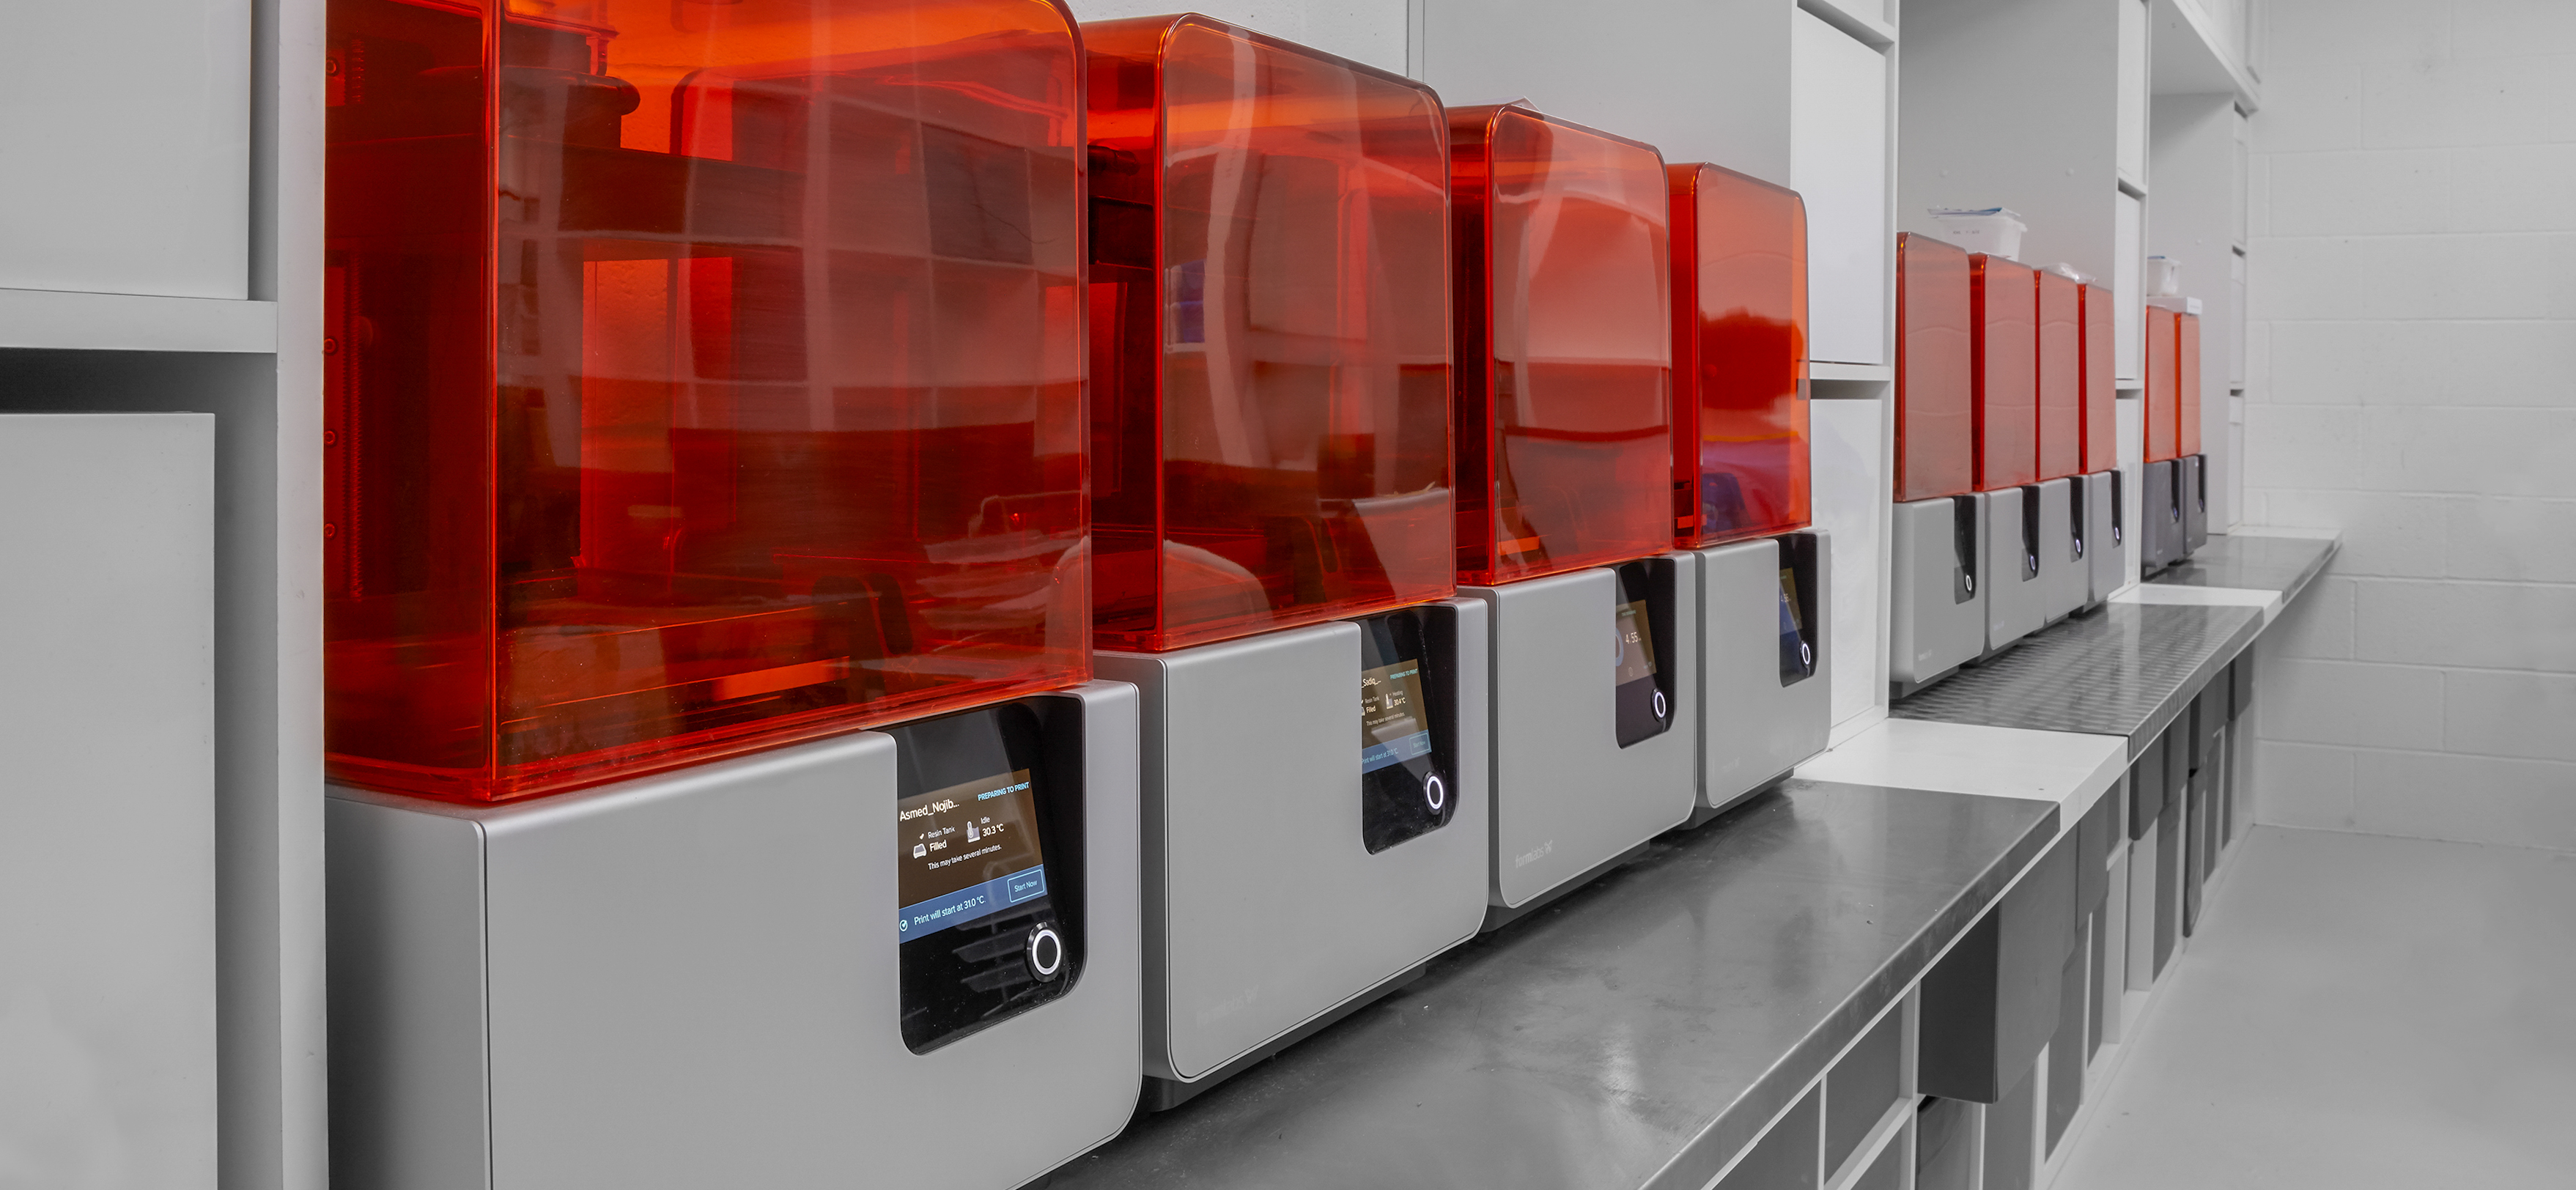 LEARN MORE ABOUT FORMLABS 3D PRINTERS